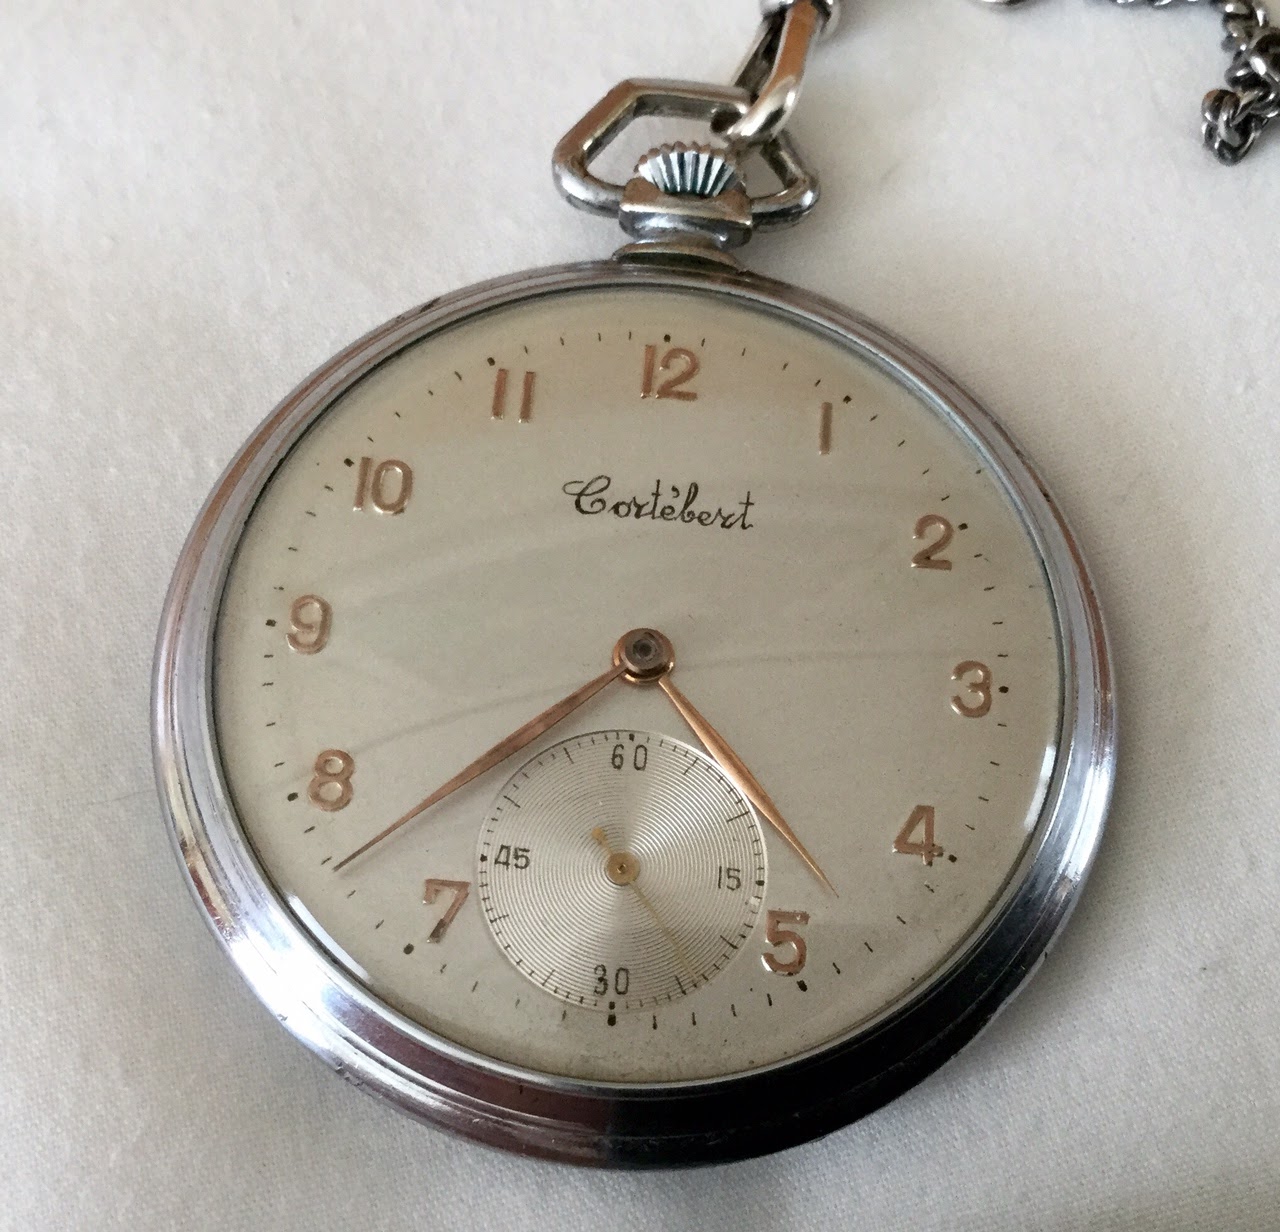 The Pocket Watch, it's origins and everything you need to know